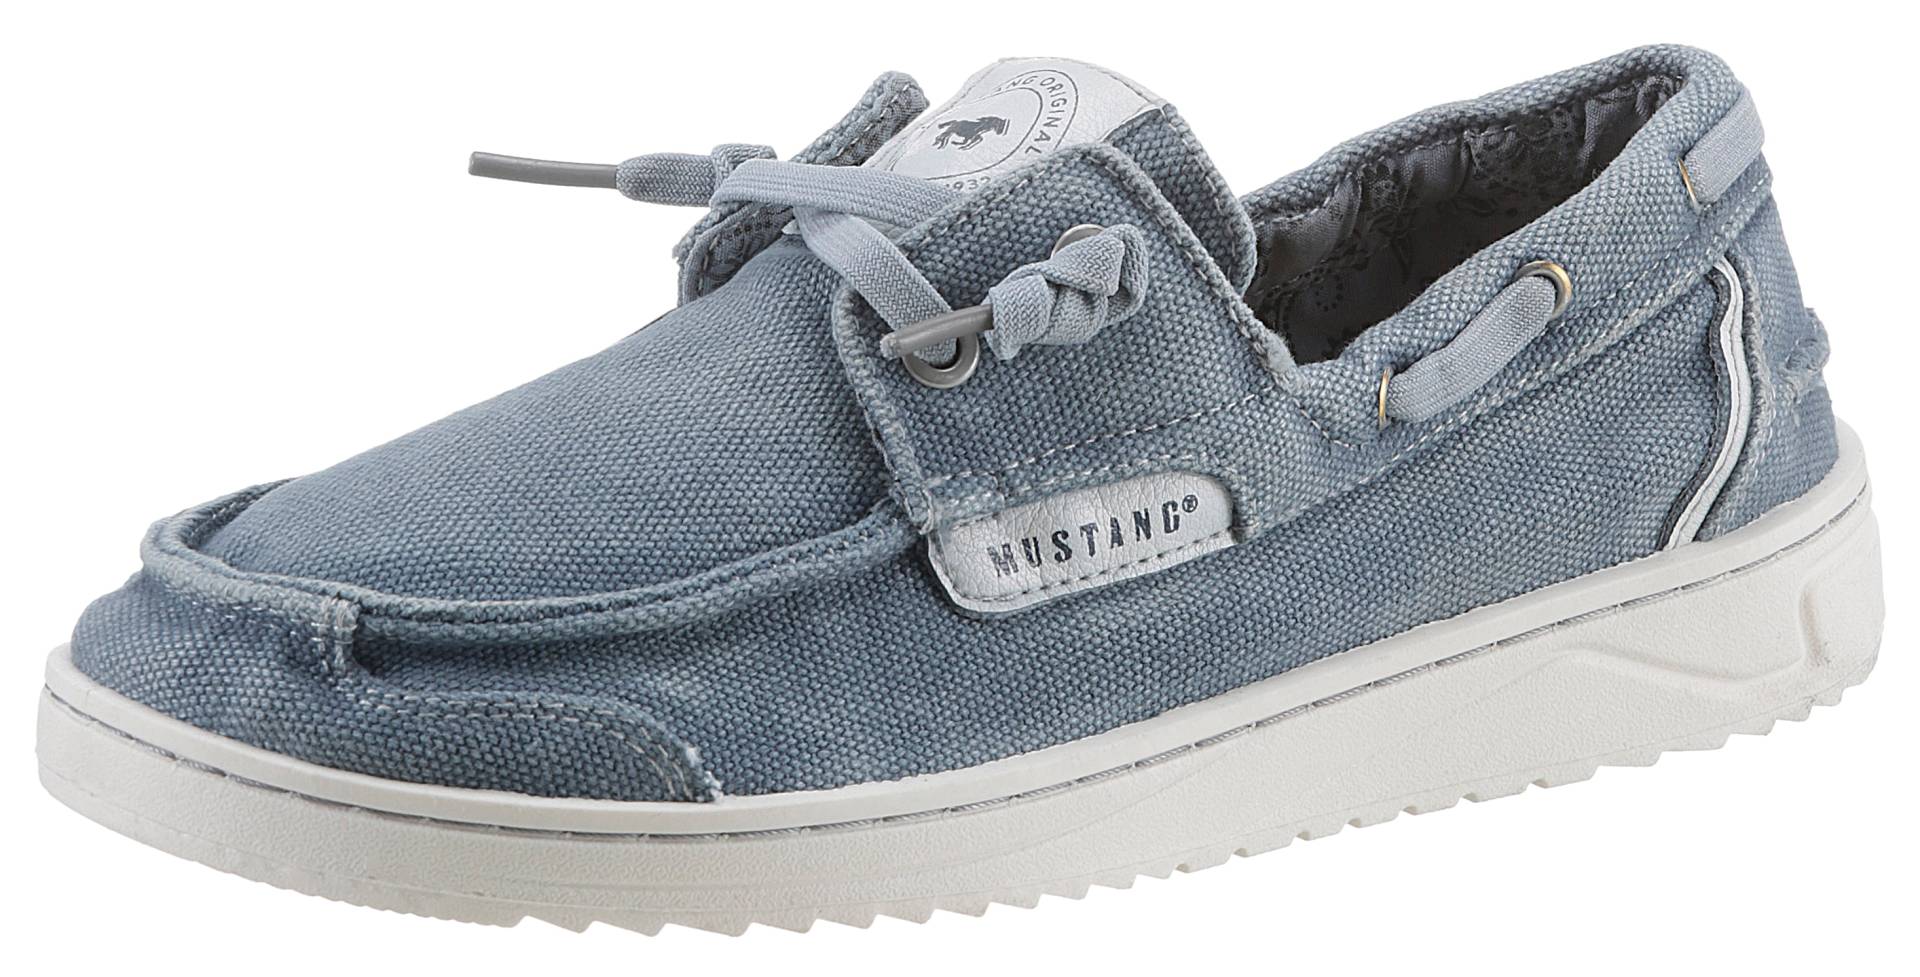 Mustang Shoes Slipper von Mustang Shoes